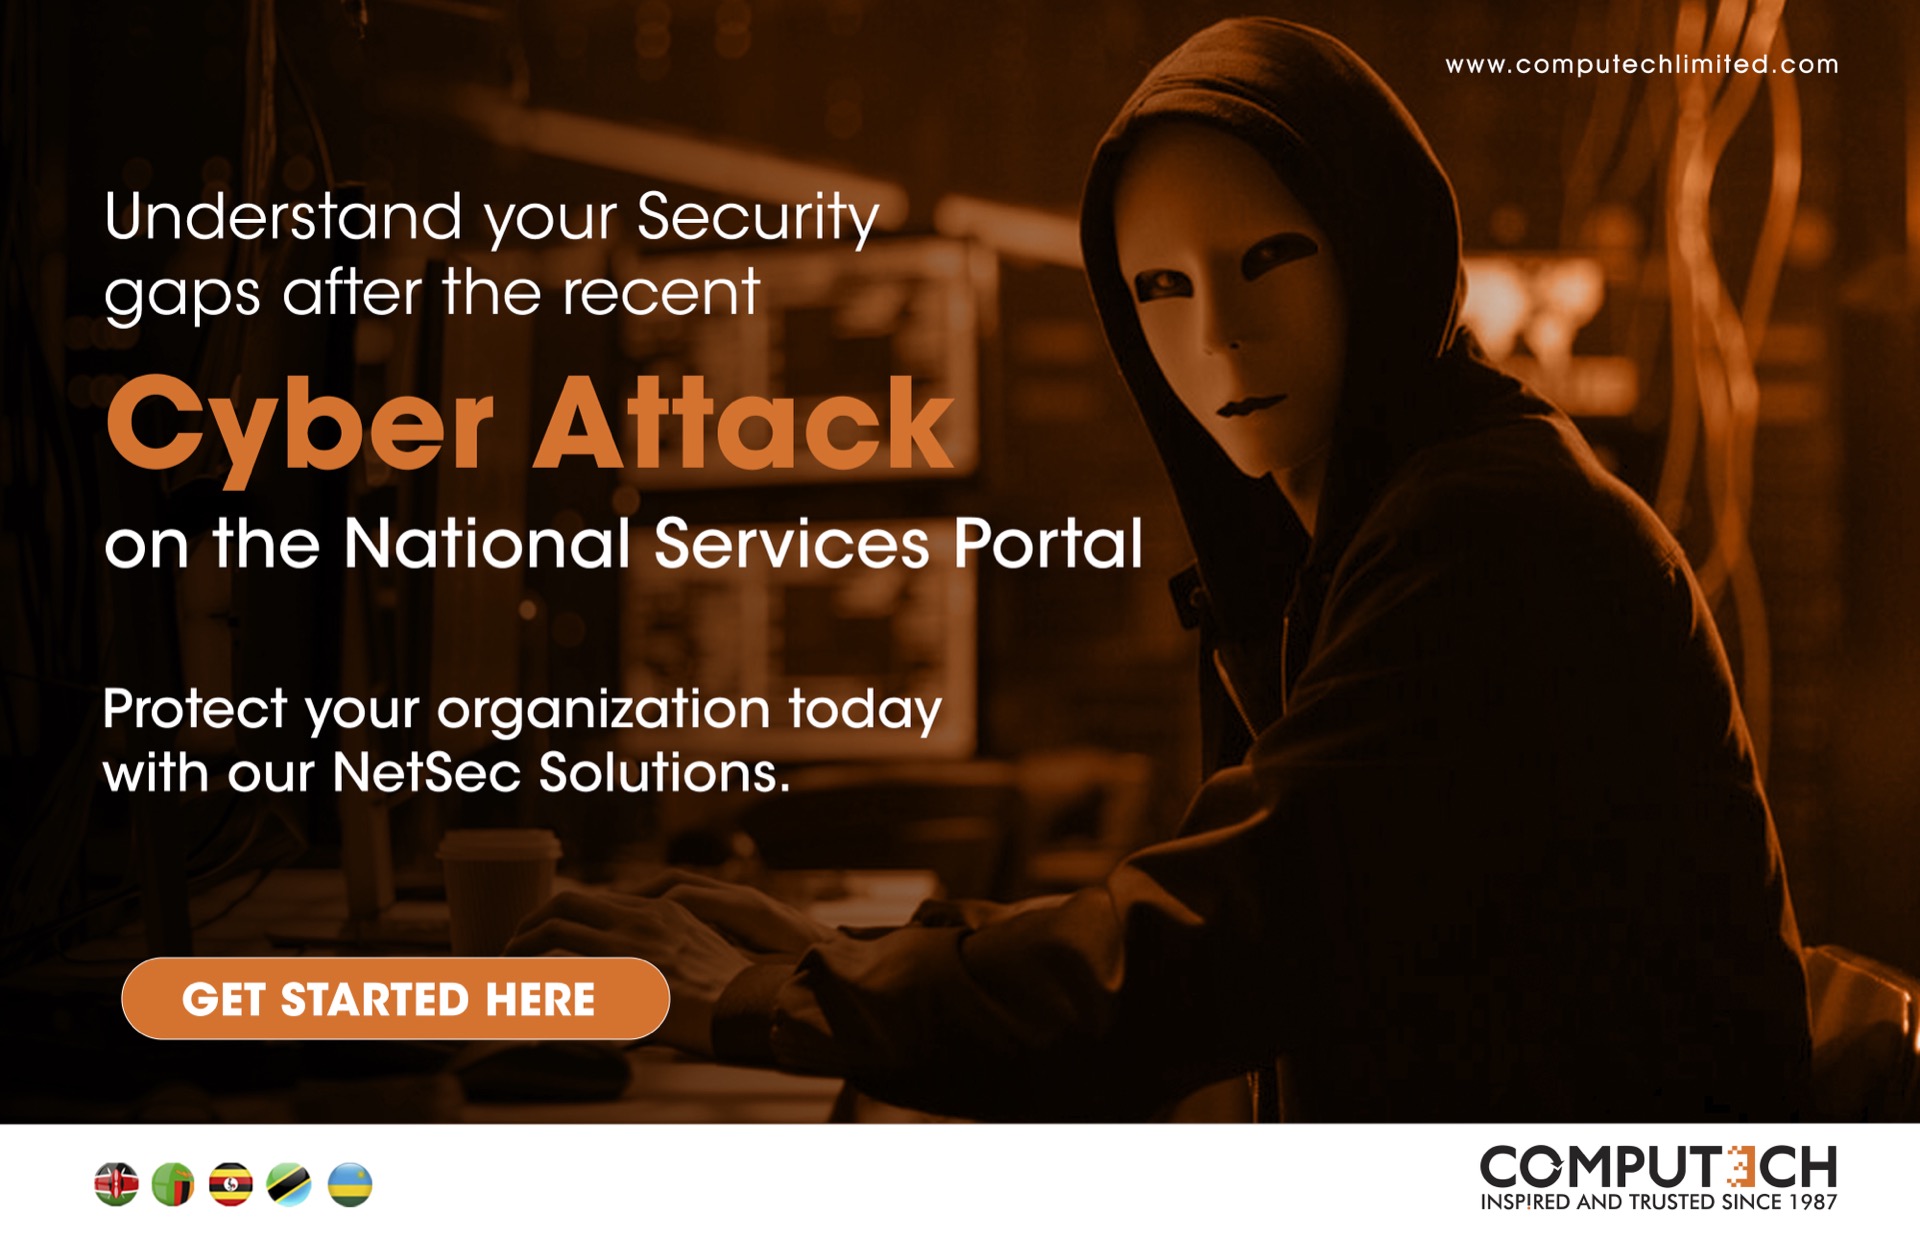 Unprecedented Cyber Attack Strikes National Citizen Services Online Portal: A Wake-Up Call for Cybersecurity Vigilance